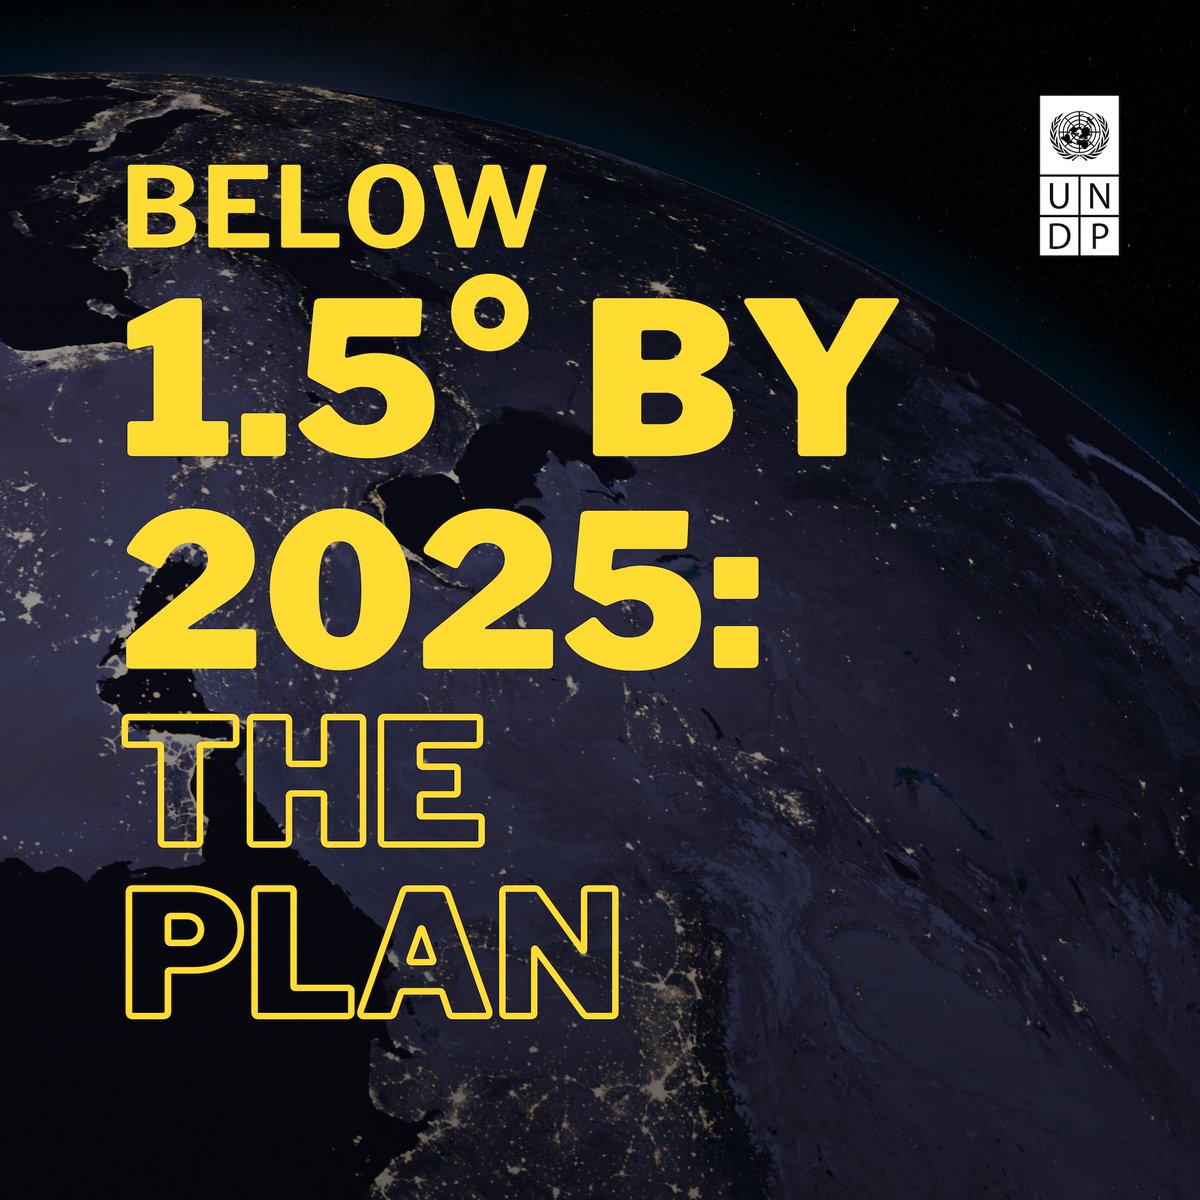 The time is now to take bold climate action. Today, @UNDP is unveiling #ClimatePromise 2025. Join me, @antonioguterres, @cassie_flynn & more to find out how we are scaling up climate action. Watch live now: bit.ly/3UnSrFT